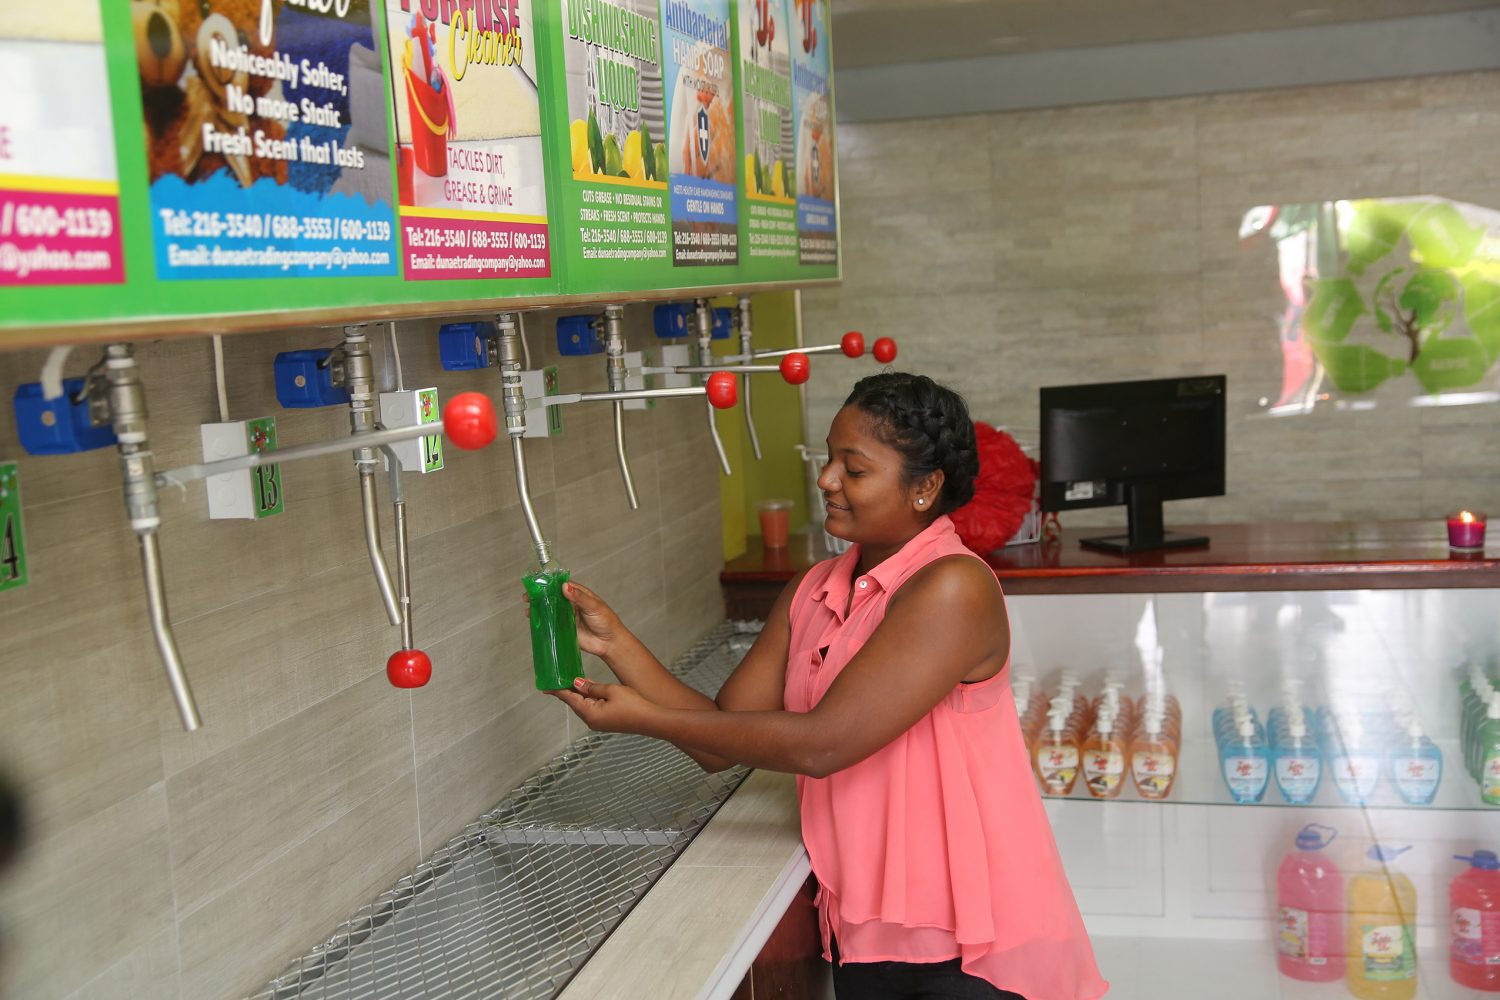 A demonstration of how to use the dispensers to refill an empty detergent bottle at the Tidy-Up Detergent Refill Centre, which was officially opened in the Diamond Housing Scheme on Saturday. 